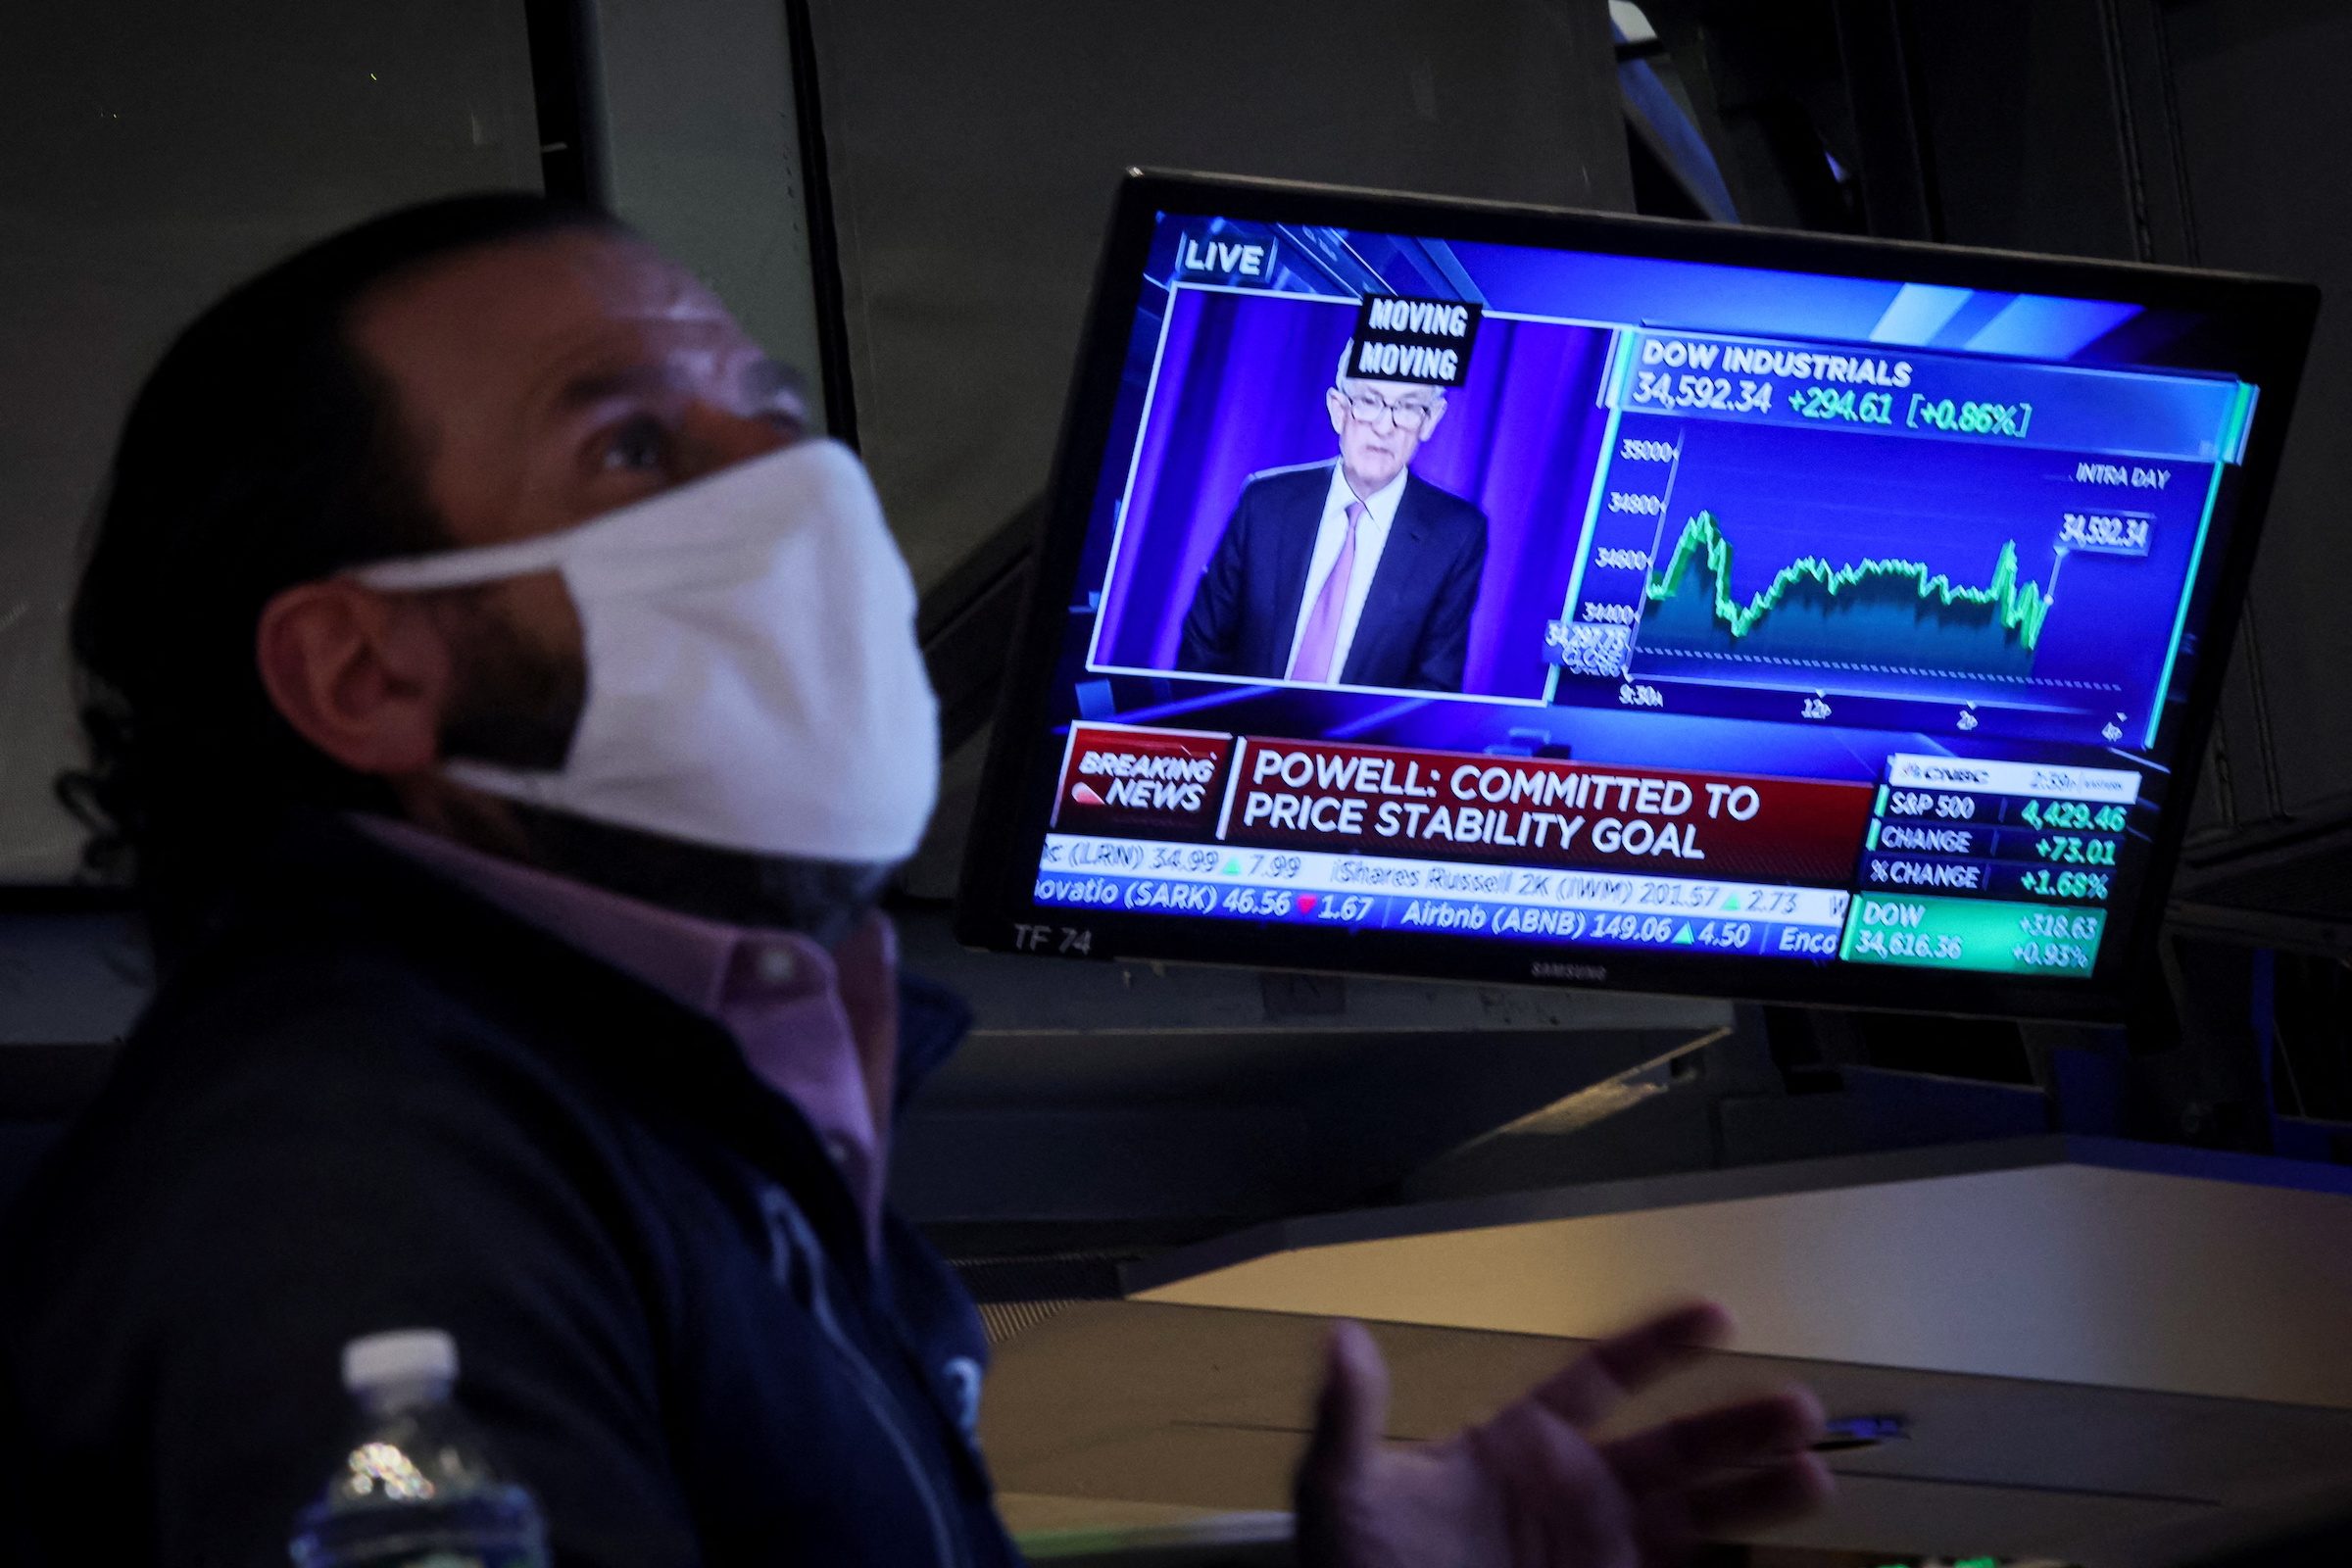 Stocks shed gains, Treasury yields jump as Fed signals rate hikes could come ‘soon’